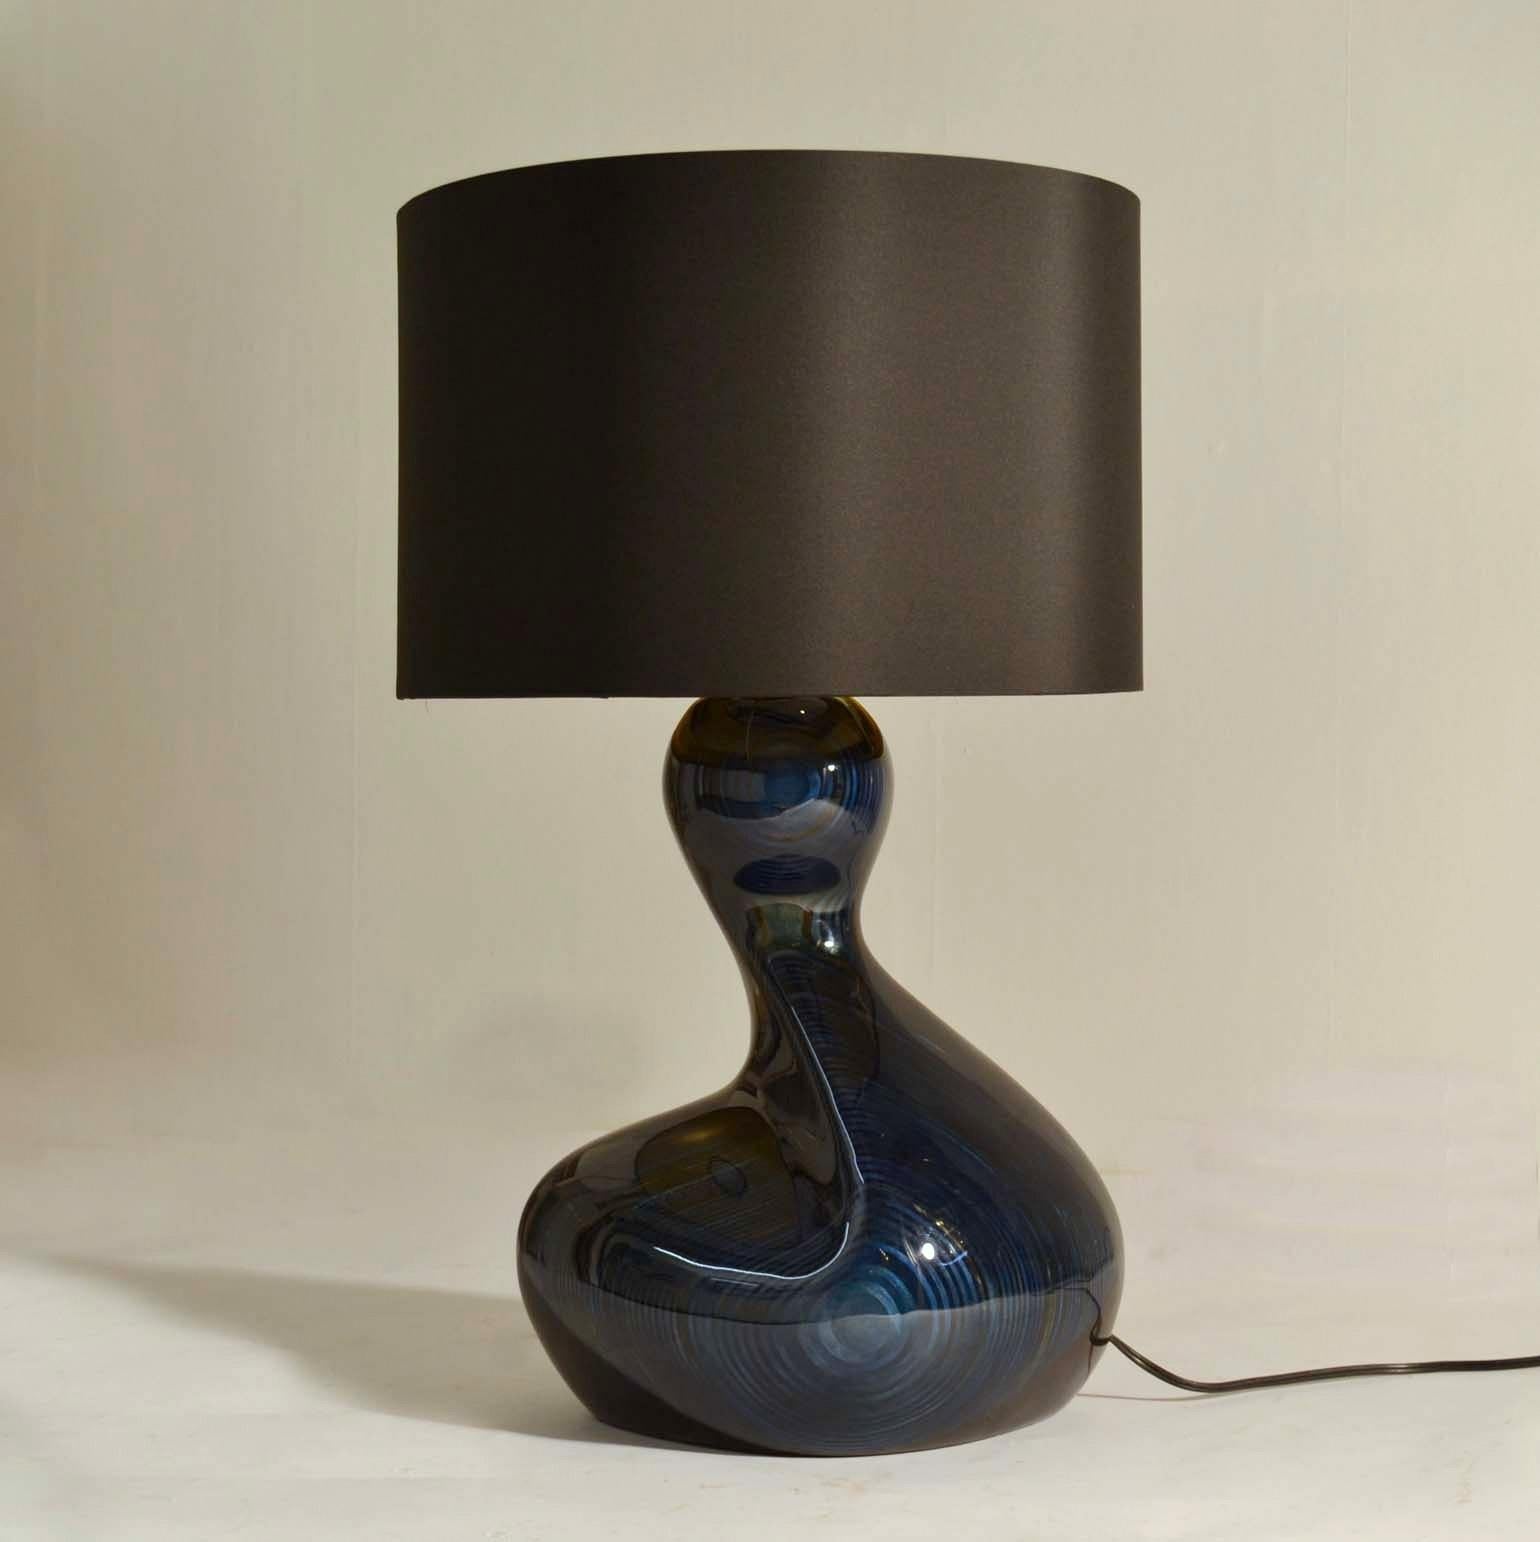 Free form curvaceous sculptural table lamp in deep blue wood with black shade by Chris Wallis 2000, no 26 of a limited edition. The base is hand carved out of a solid plywood stained and lacquered which reveals the layers in an organic way like year